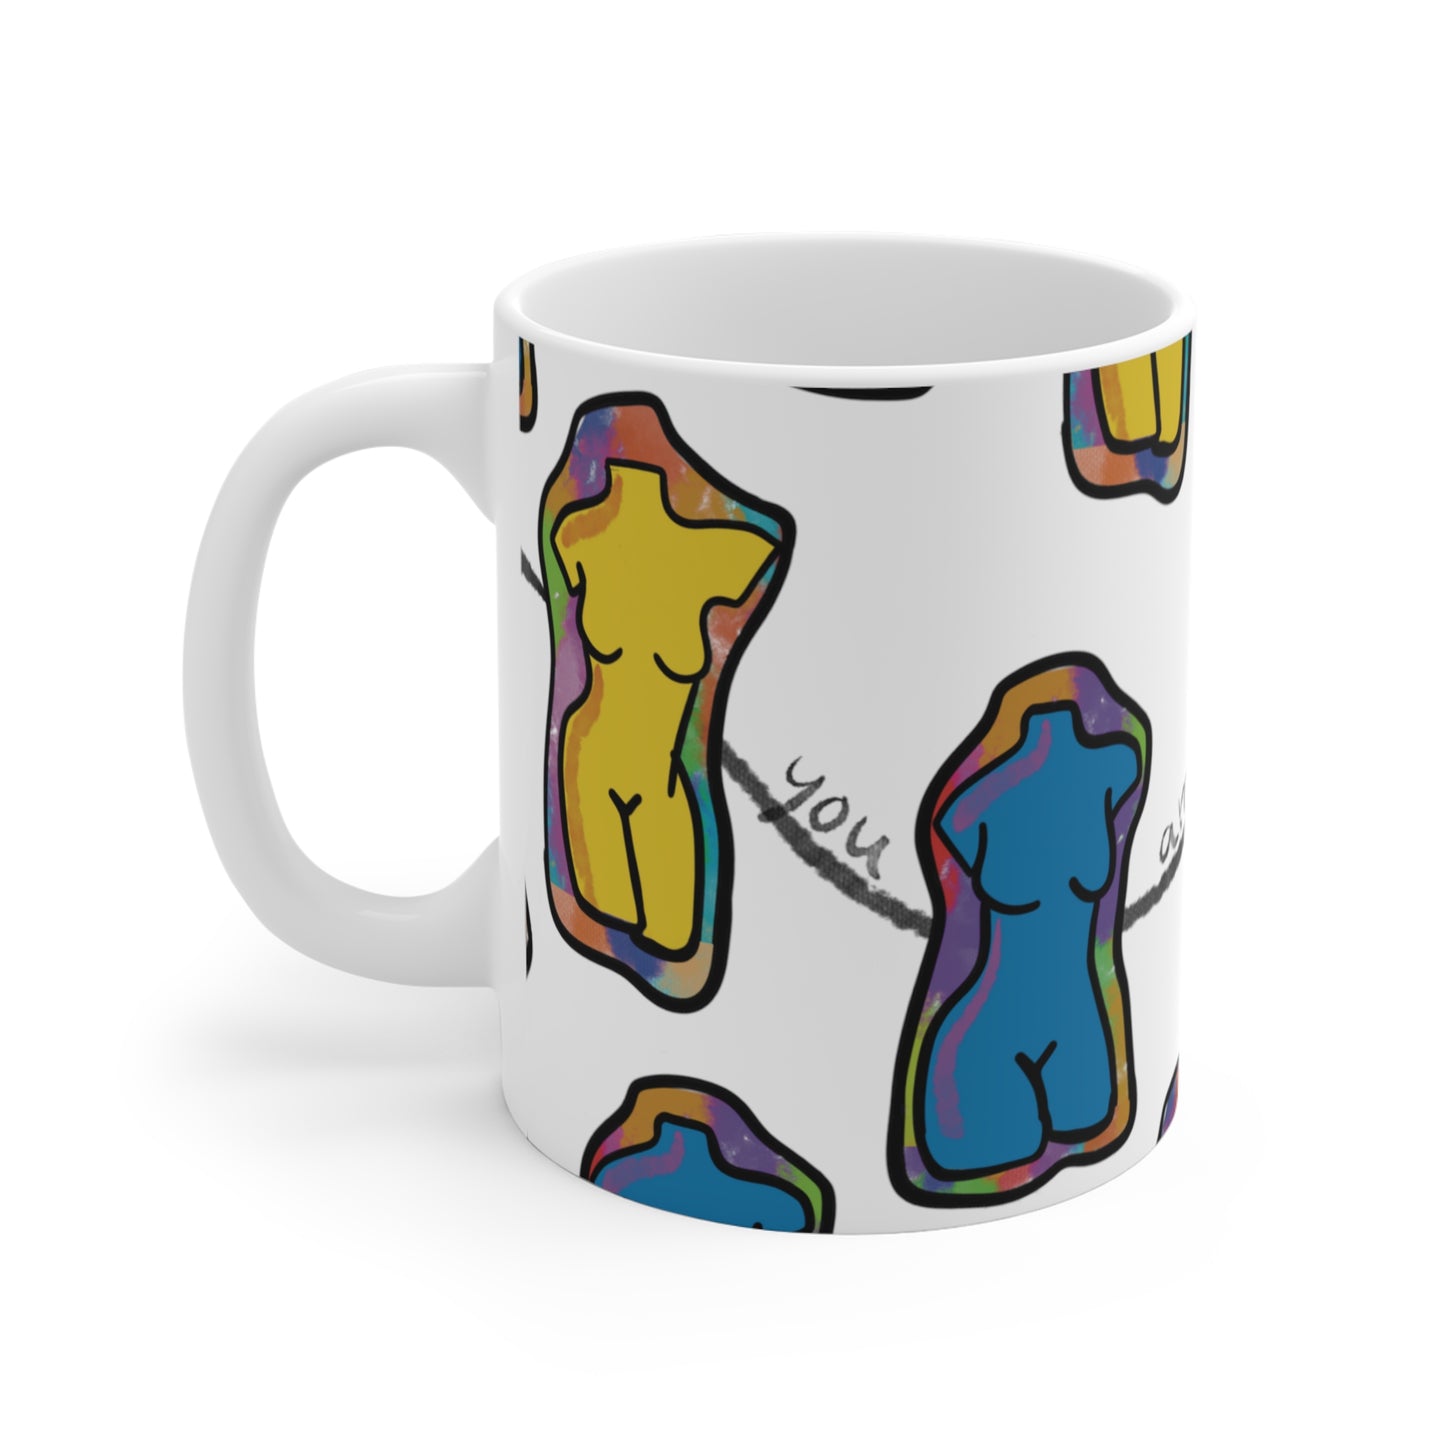 Female Body Abstract Sculptures Mug: You Are Art